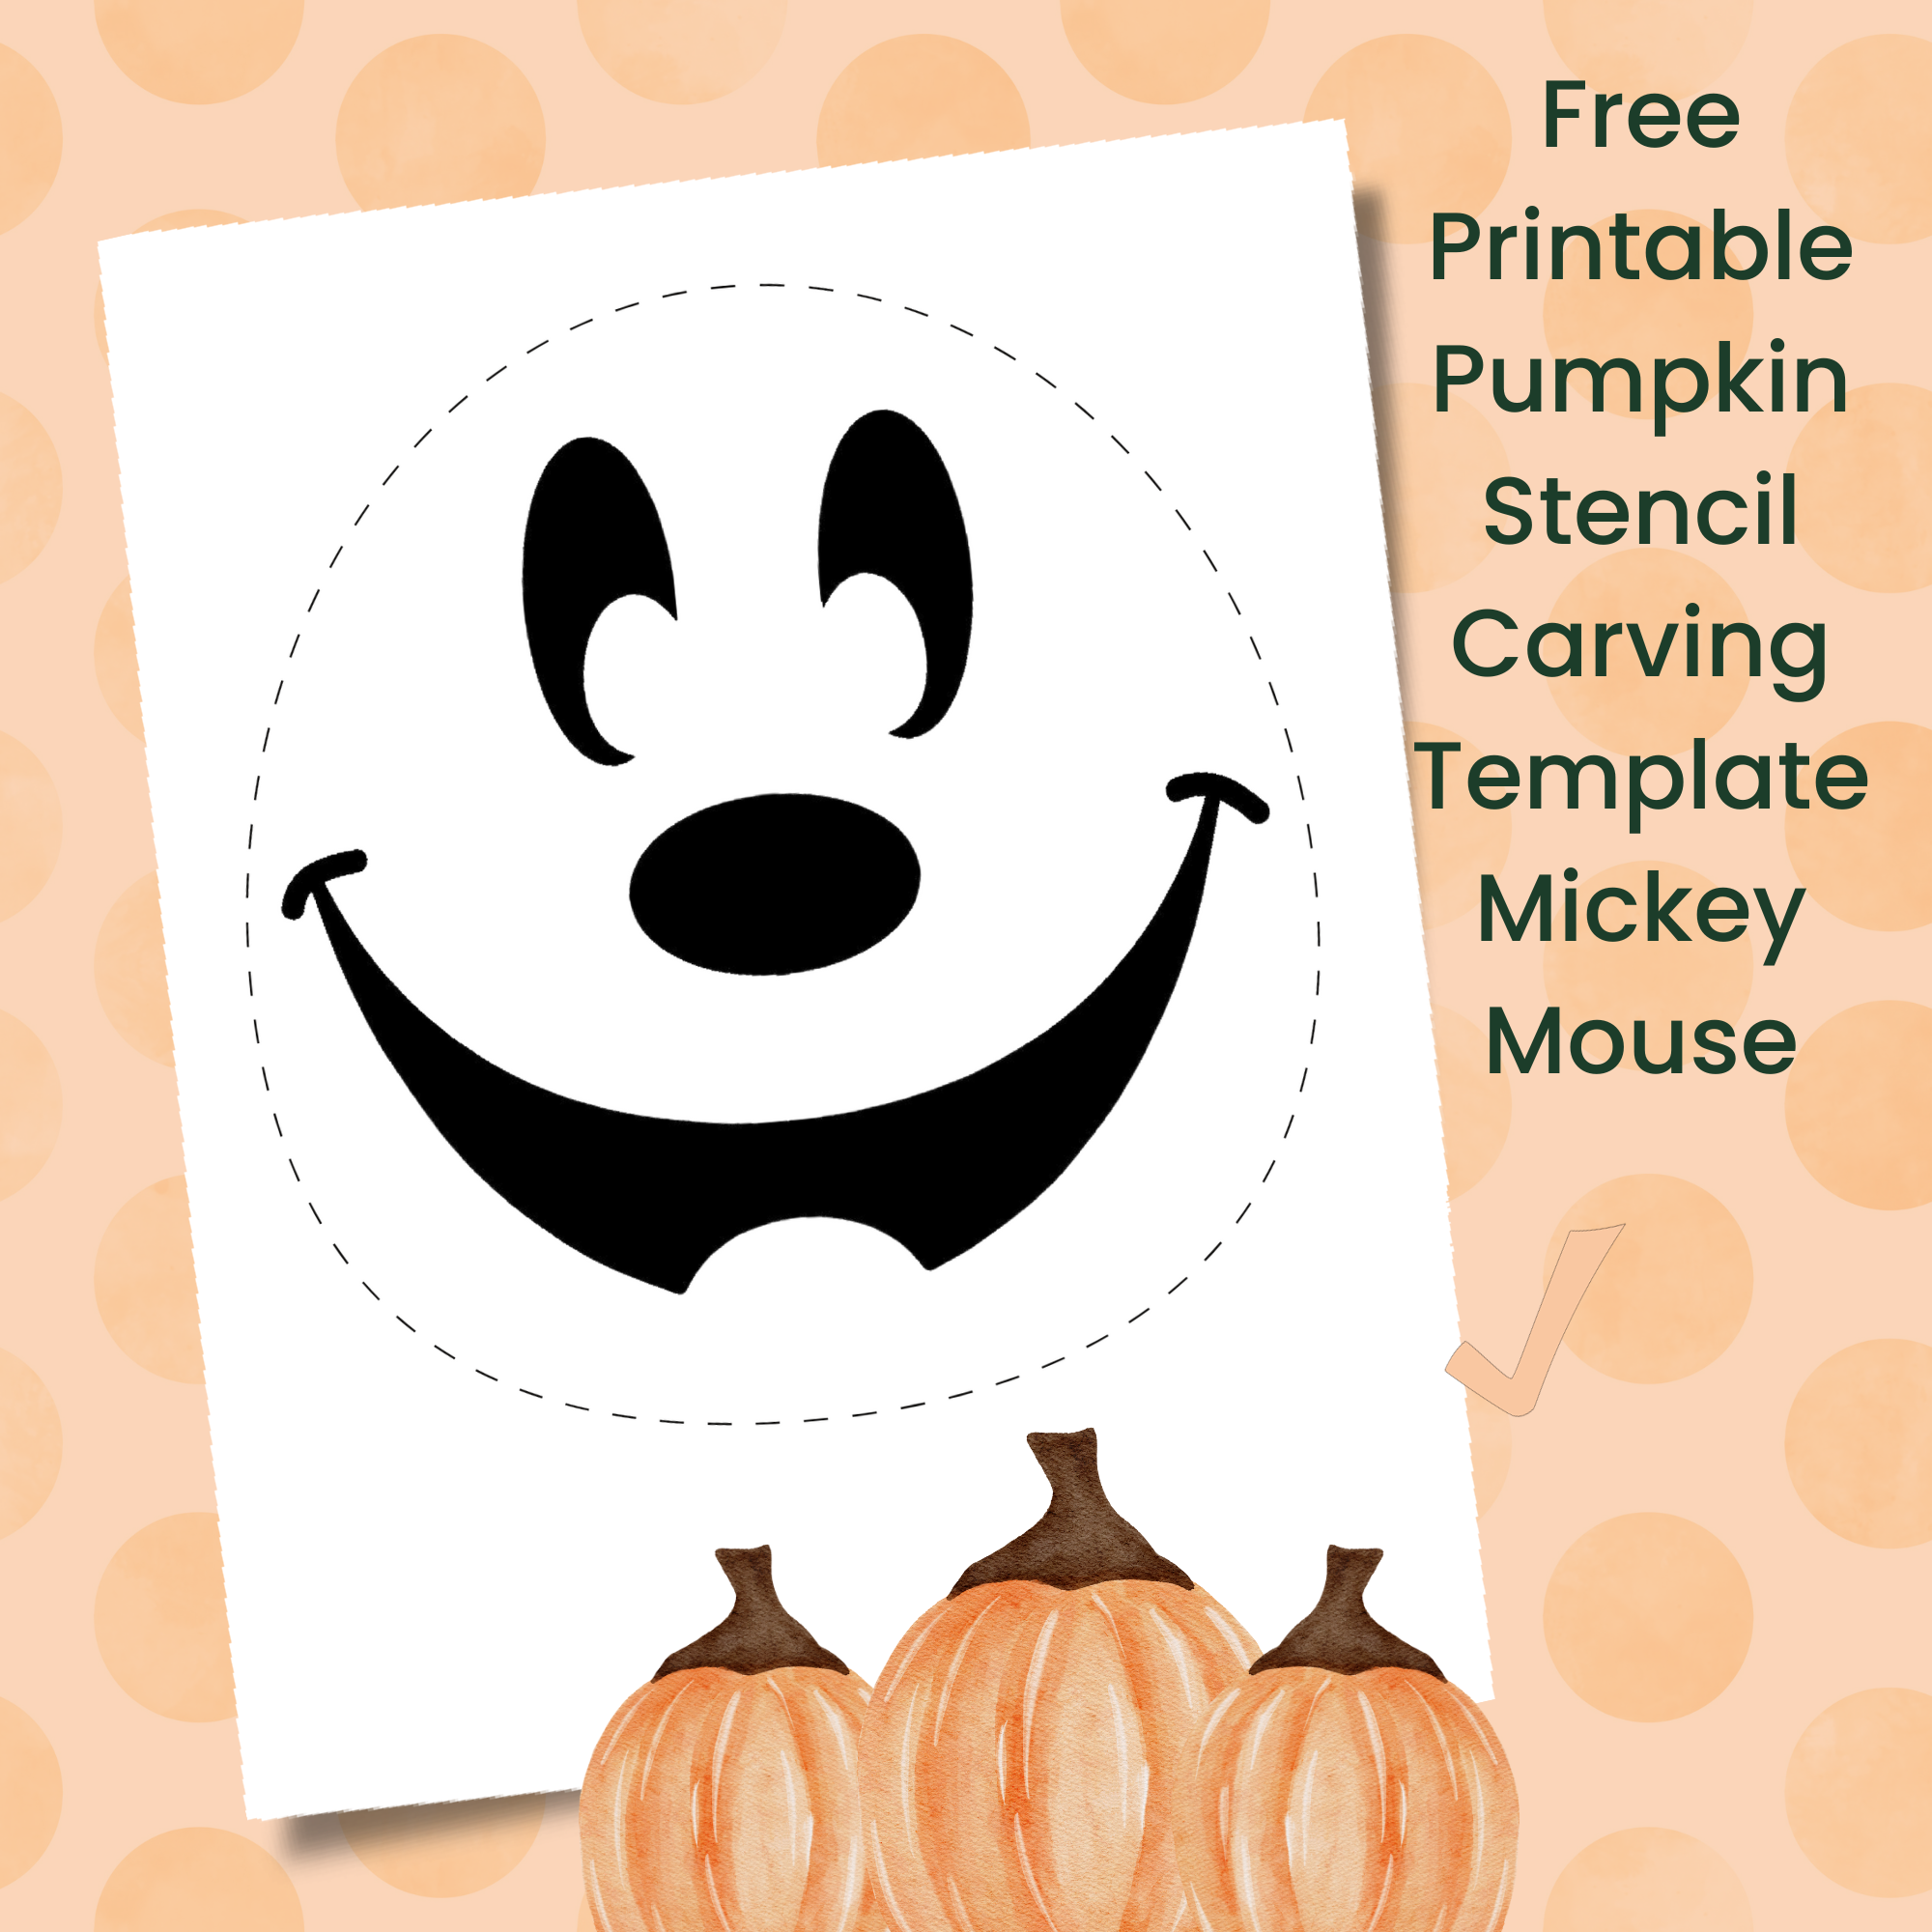 Printable Mickey Mouse Pumpkin (Free Template)